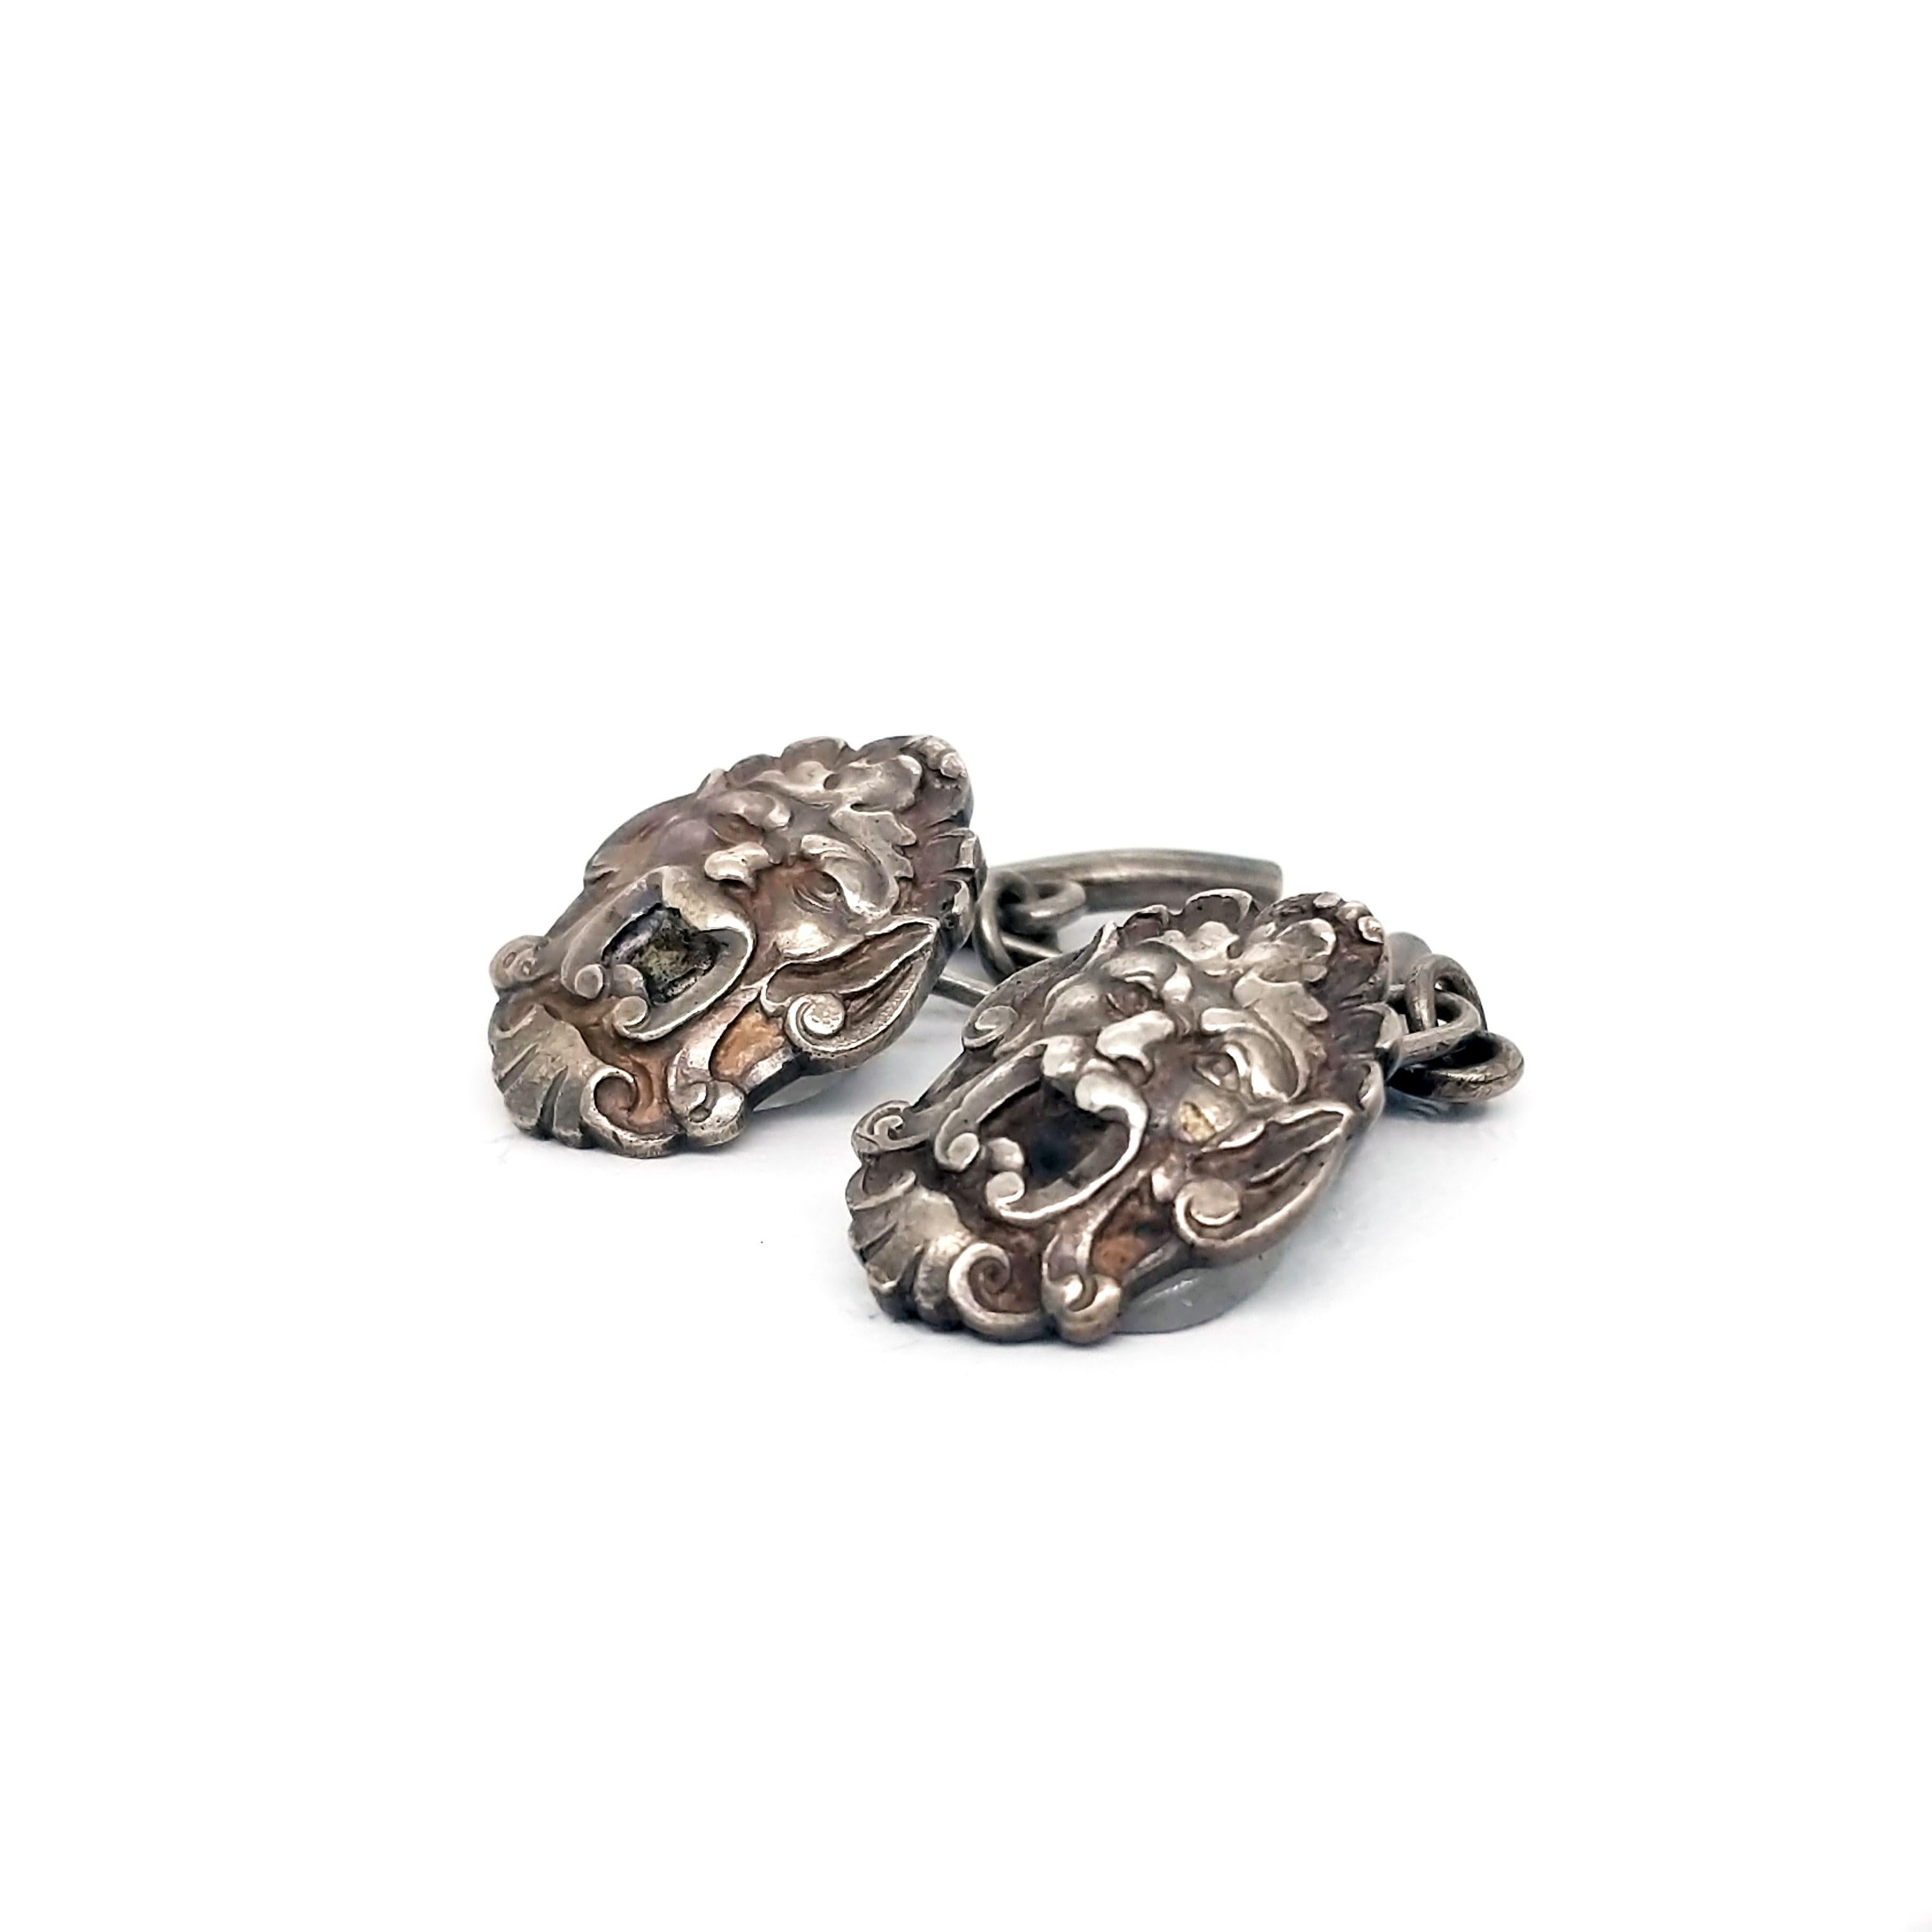 These Art Nouveau cufflinks are sure to wow! Made of sterling silver and hand-engraved with gargoyle faces, these cufflinks are sure to add some spice to your look!  These open-mouthed gargoyles would make just the perfect addition to your